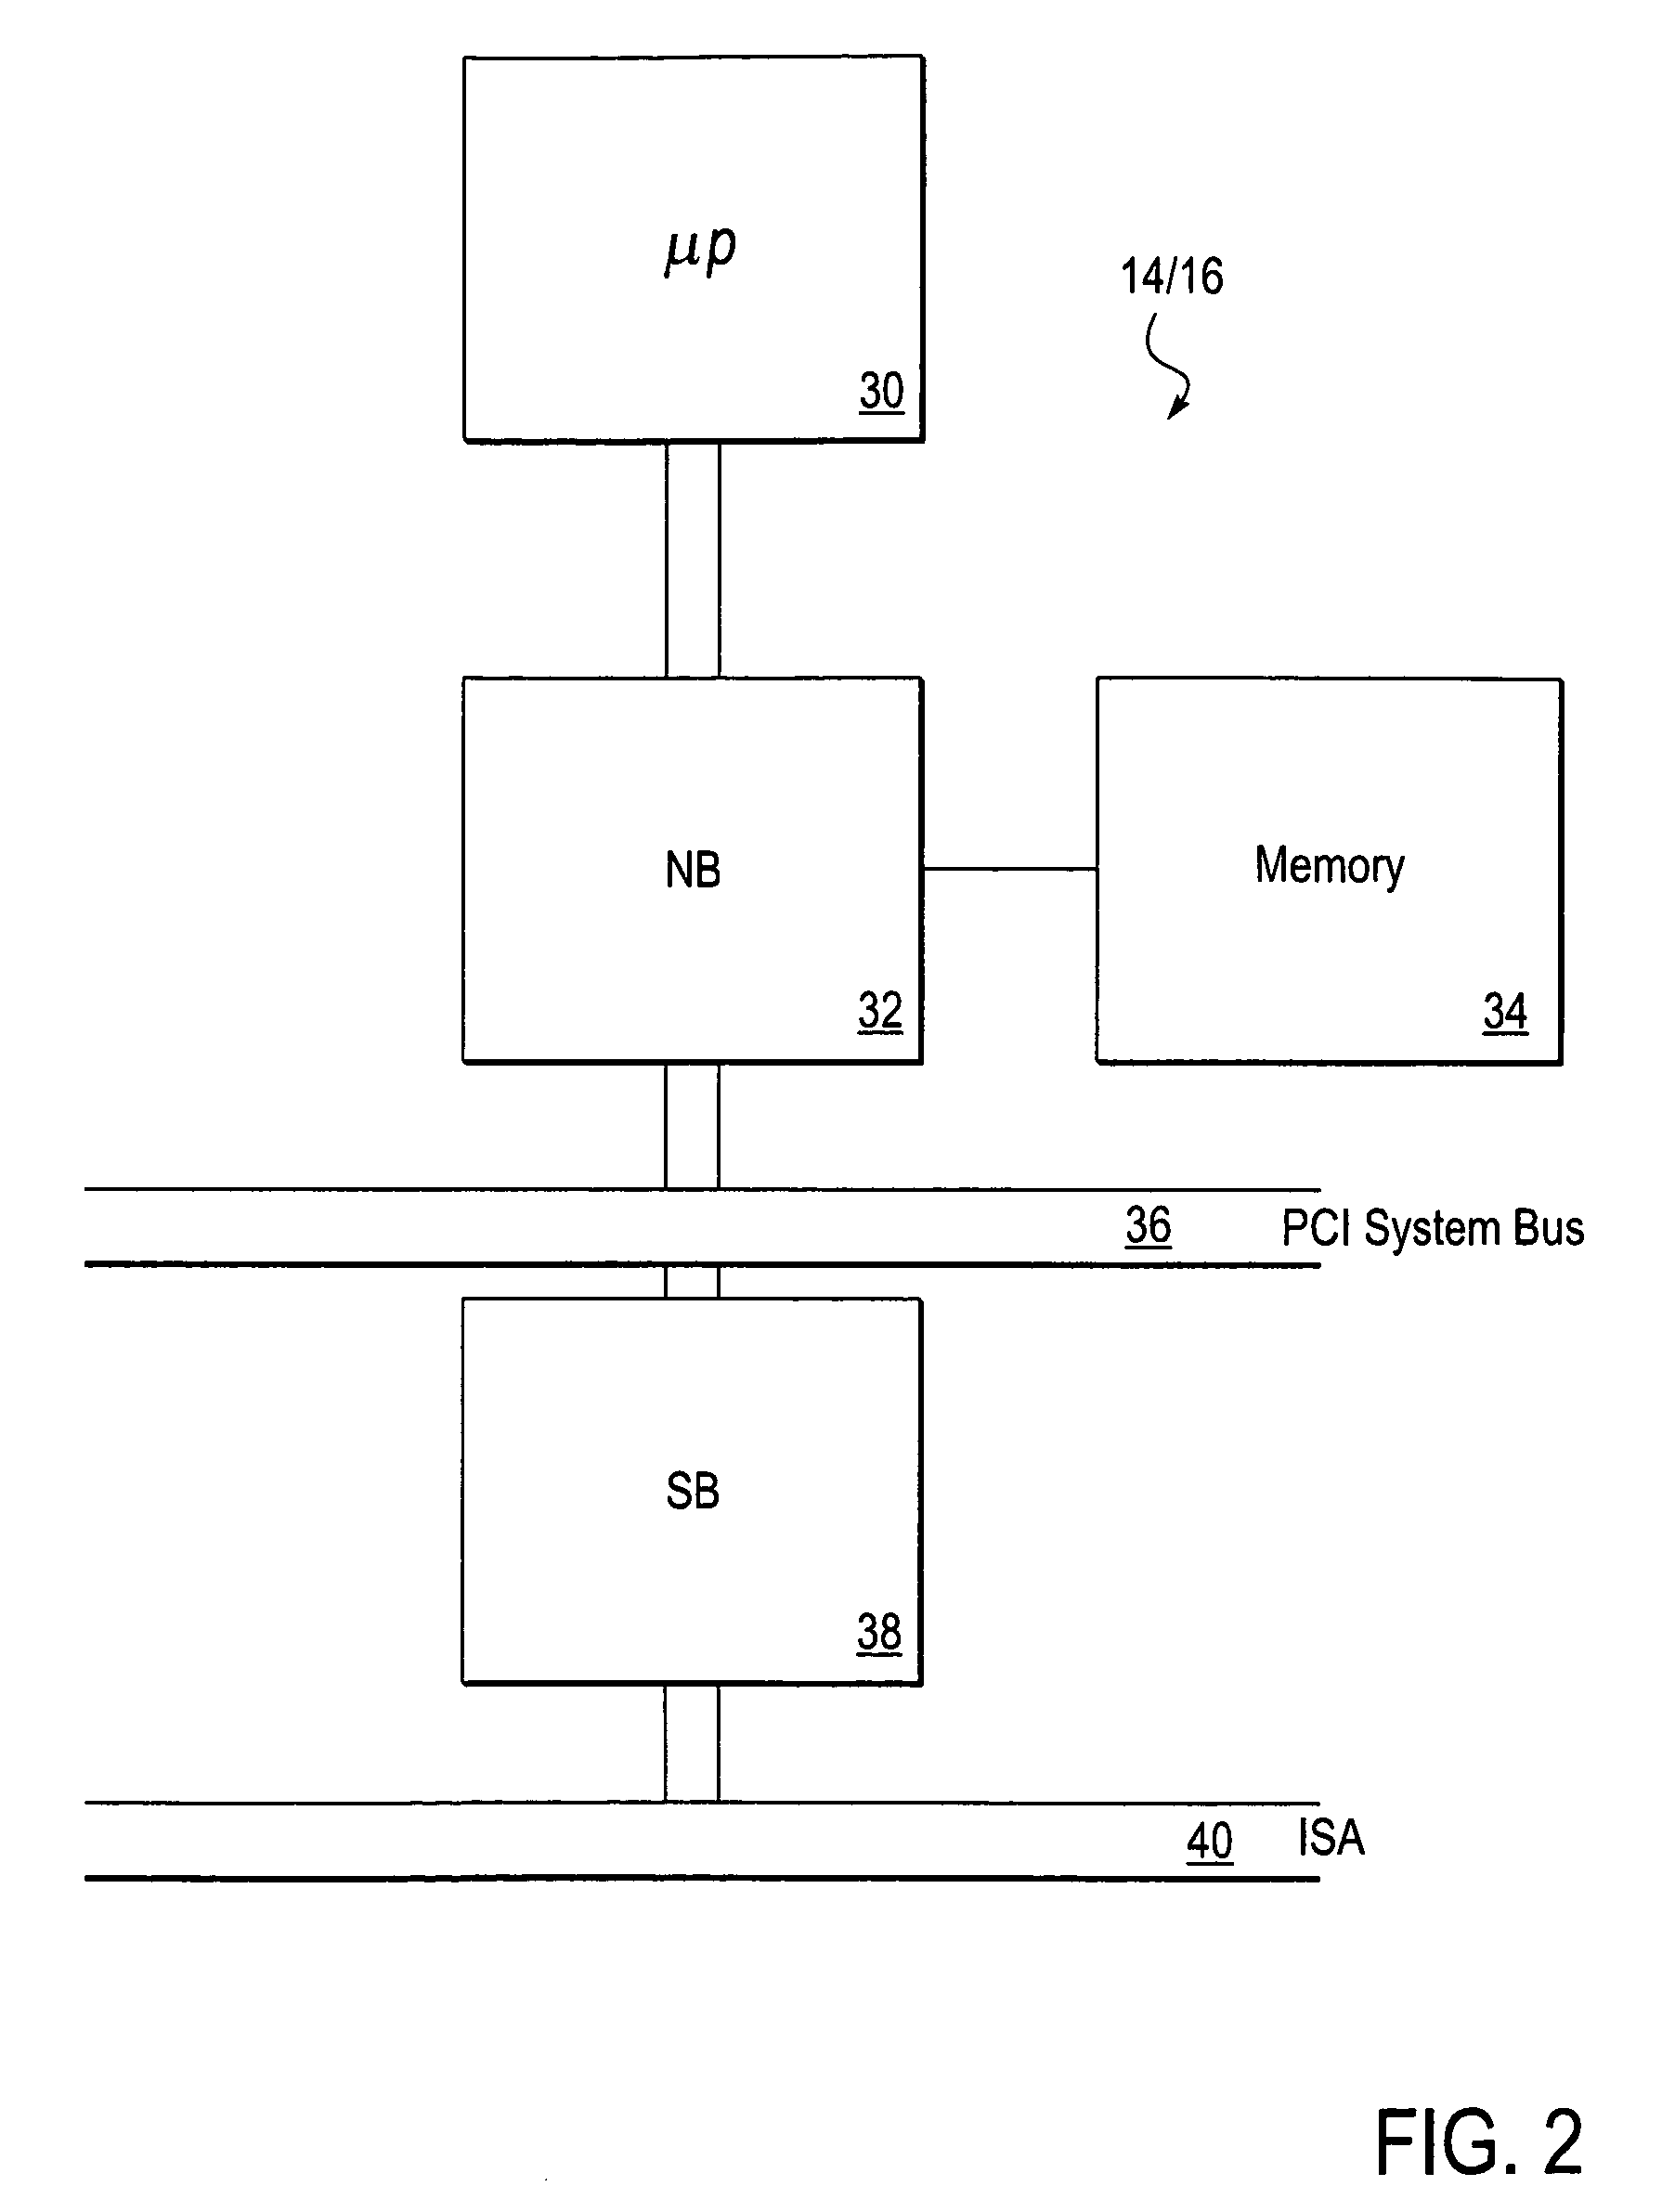 Network object delivery system for personal computing device